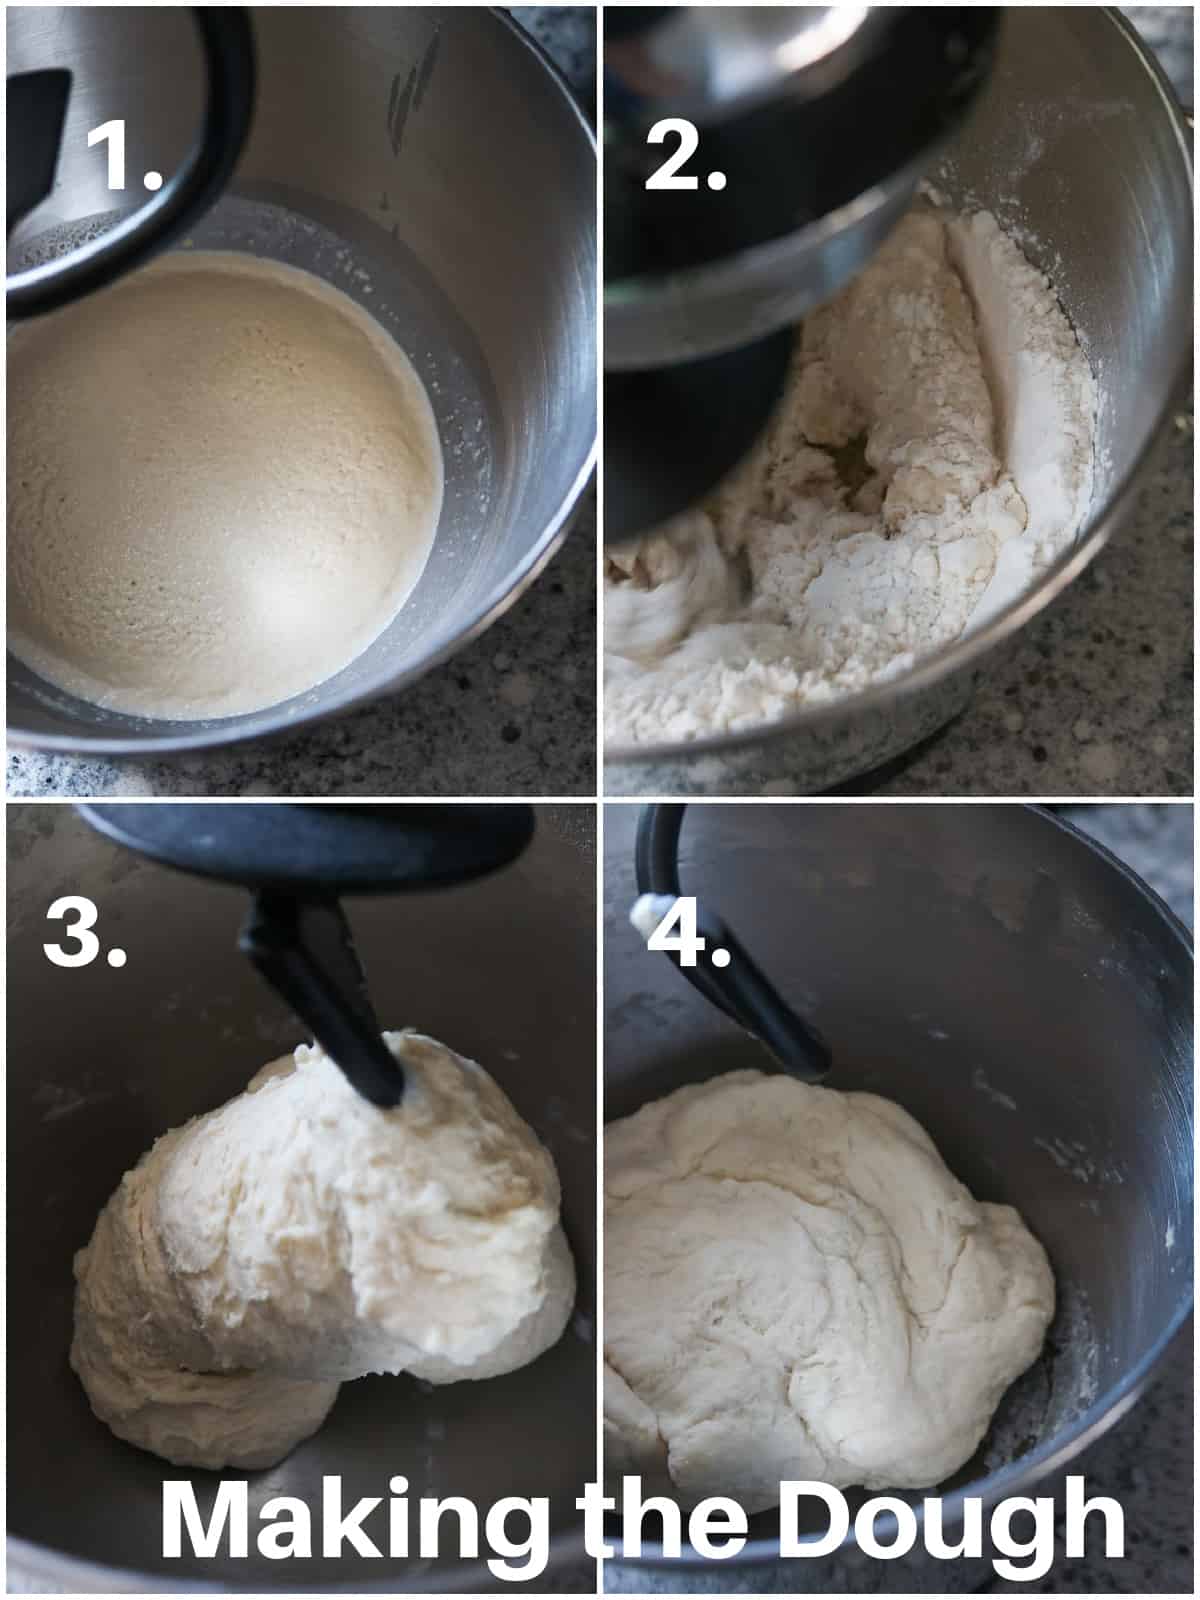 A collage showing the process of making the dough.